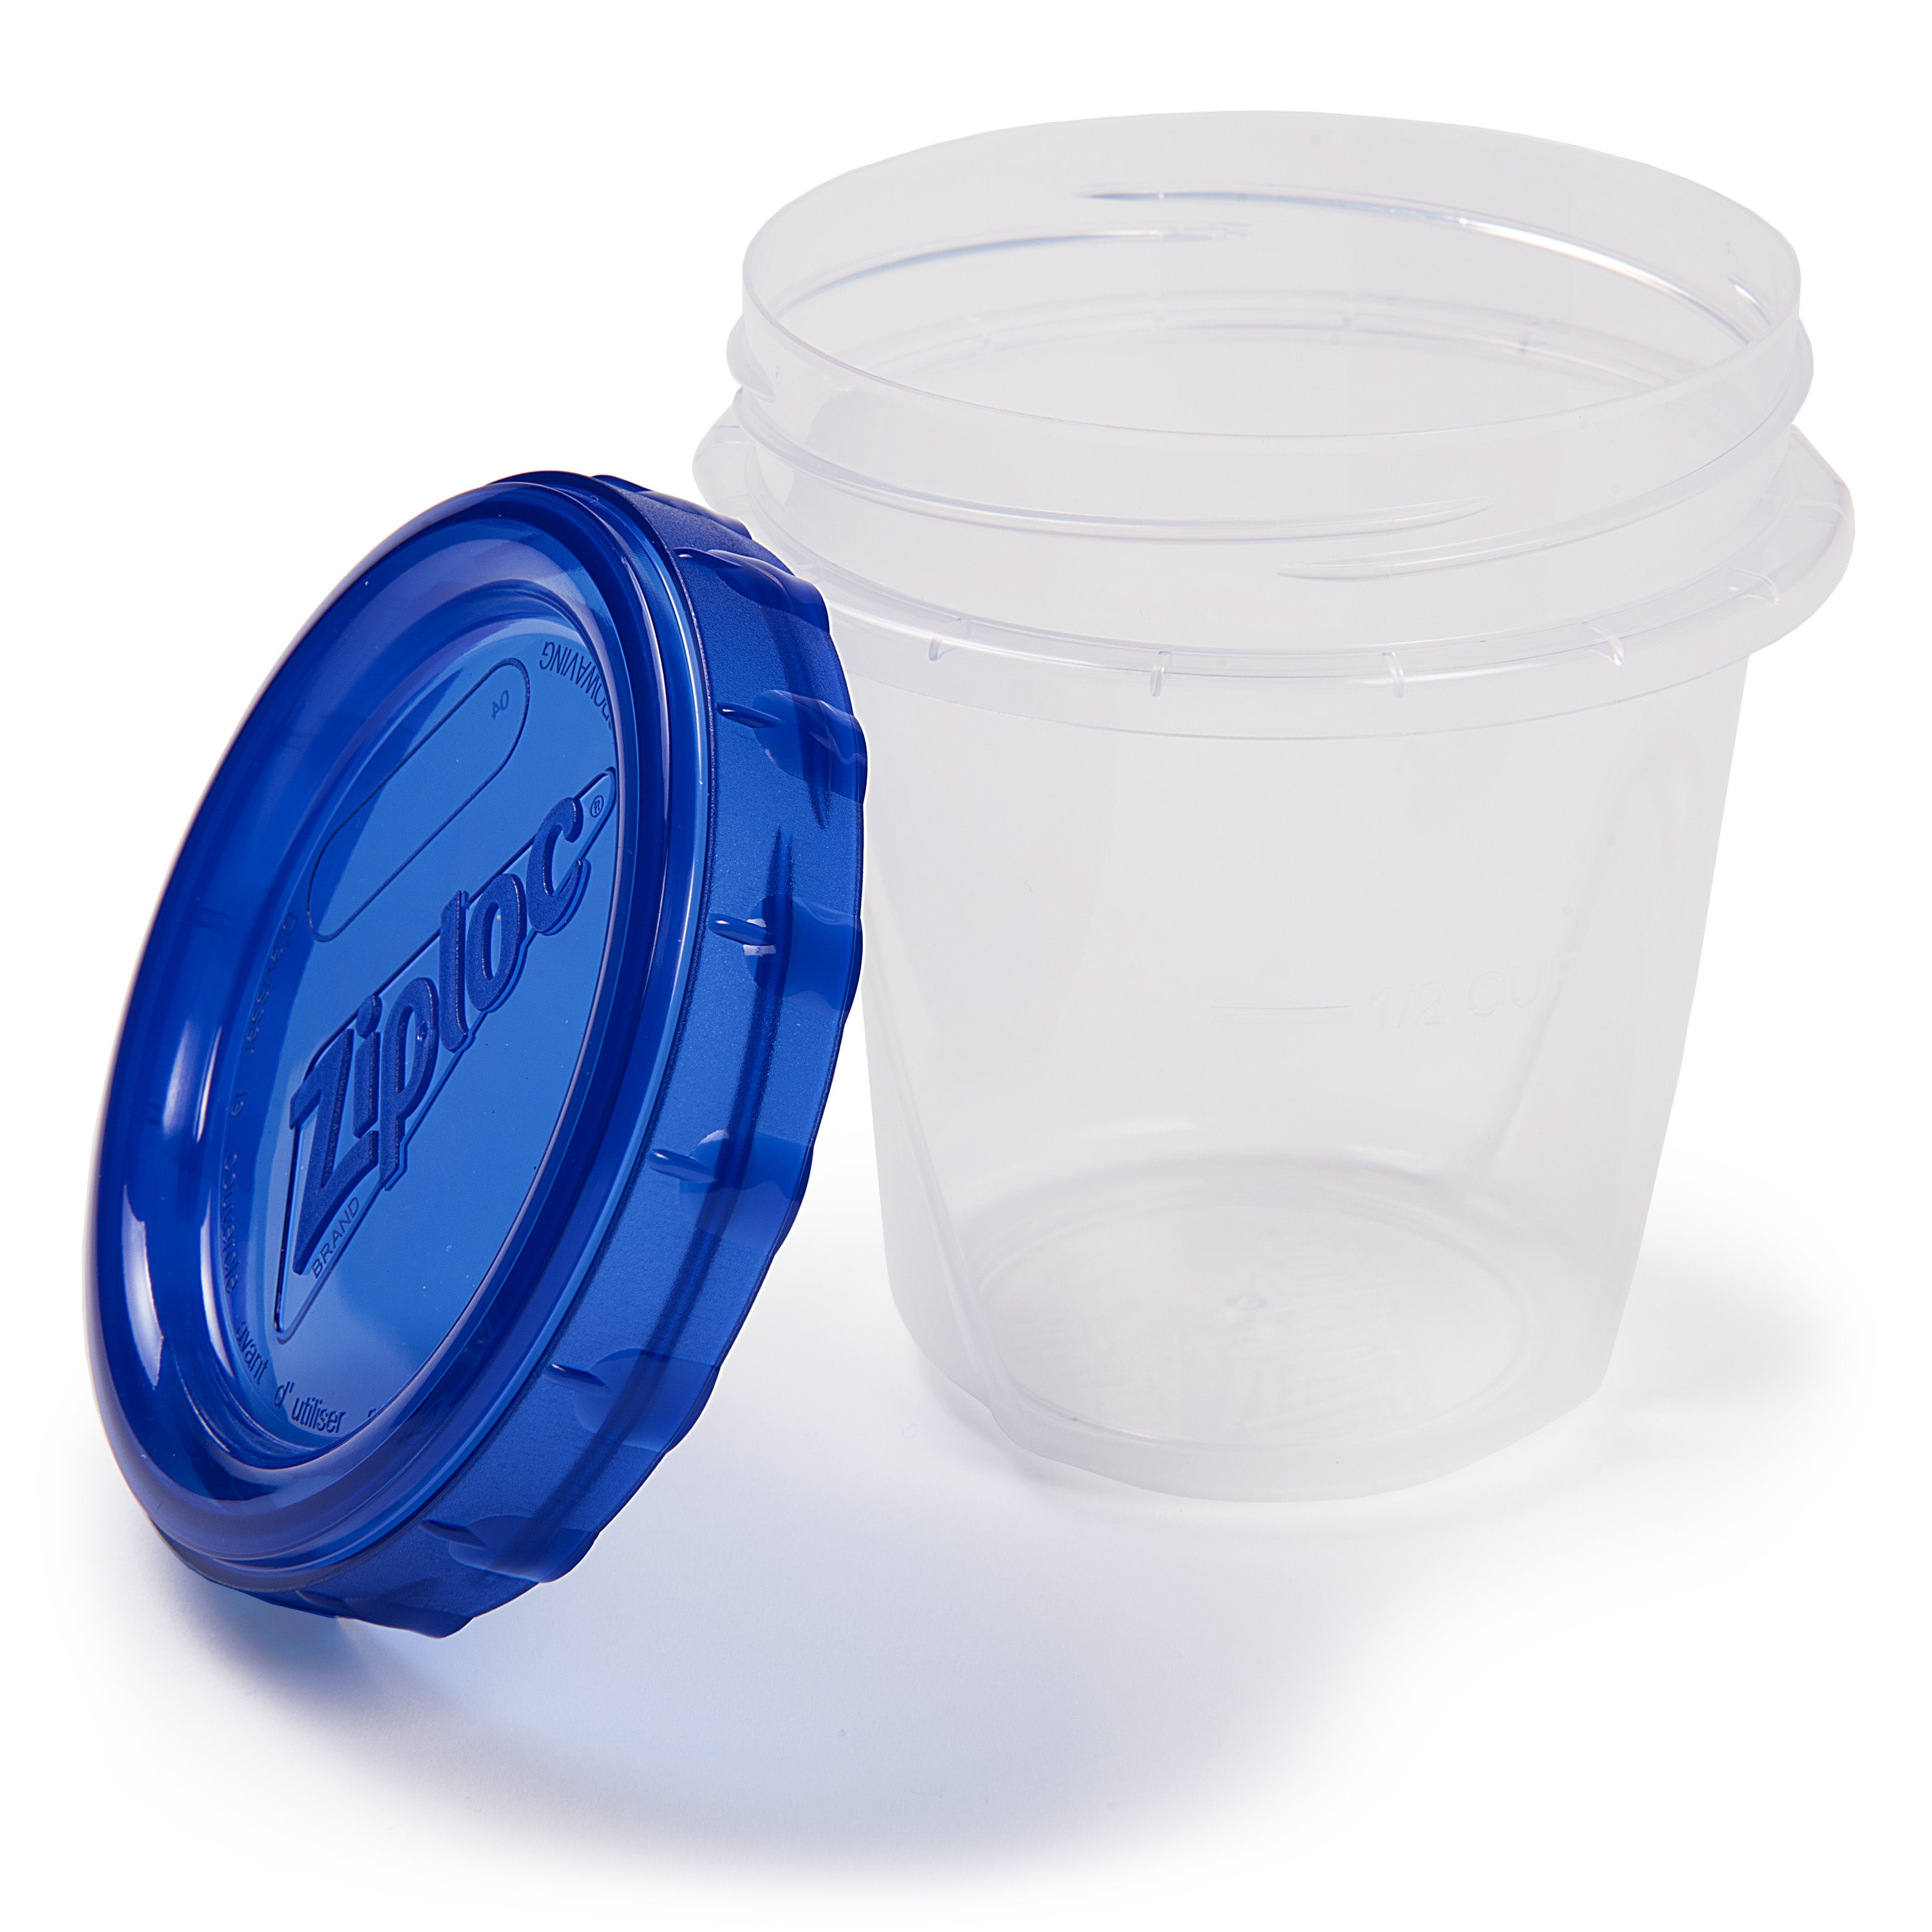 Ziploc Twist 'n Loc Extra Small Containers - 4ct 4 ct